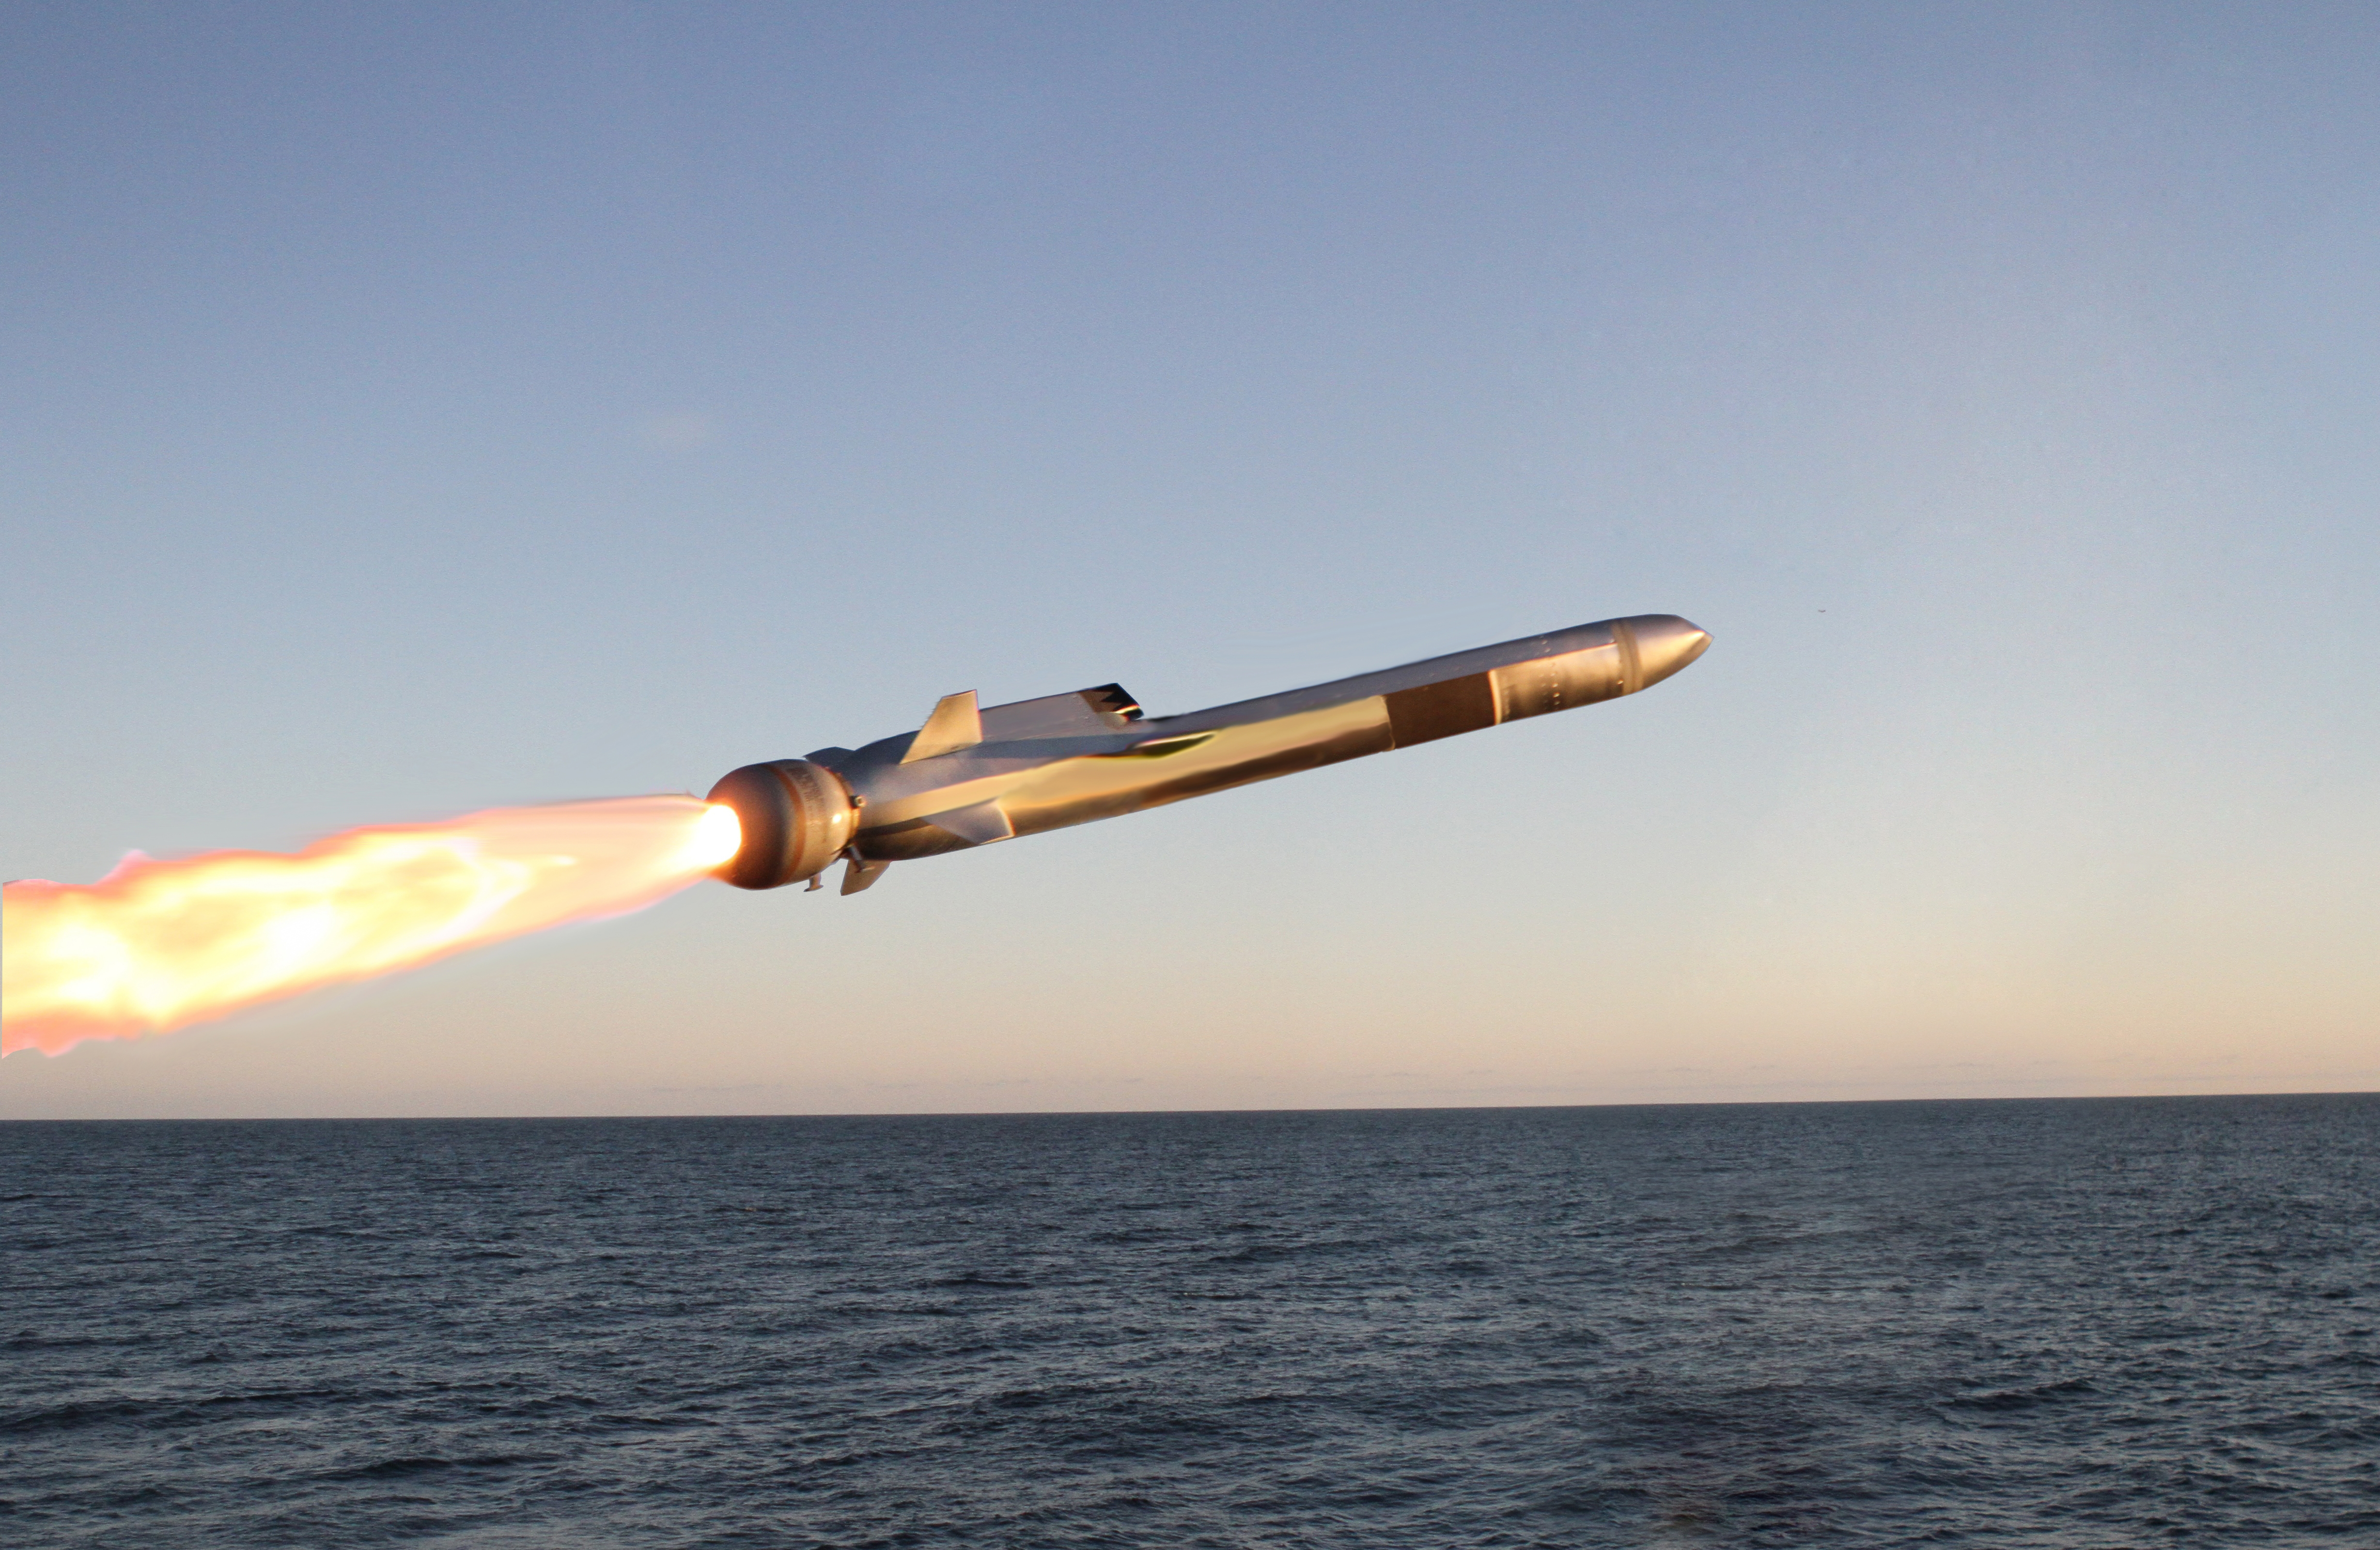 Known for its "sea-skimming" capability, the Naval Strike Missile can fly at very low altitudes over water and land. 